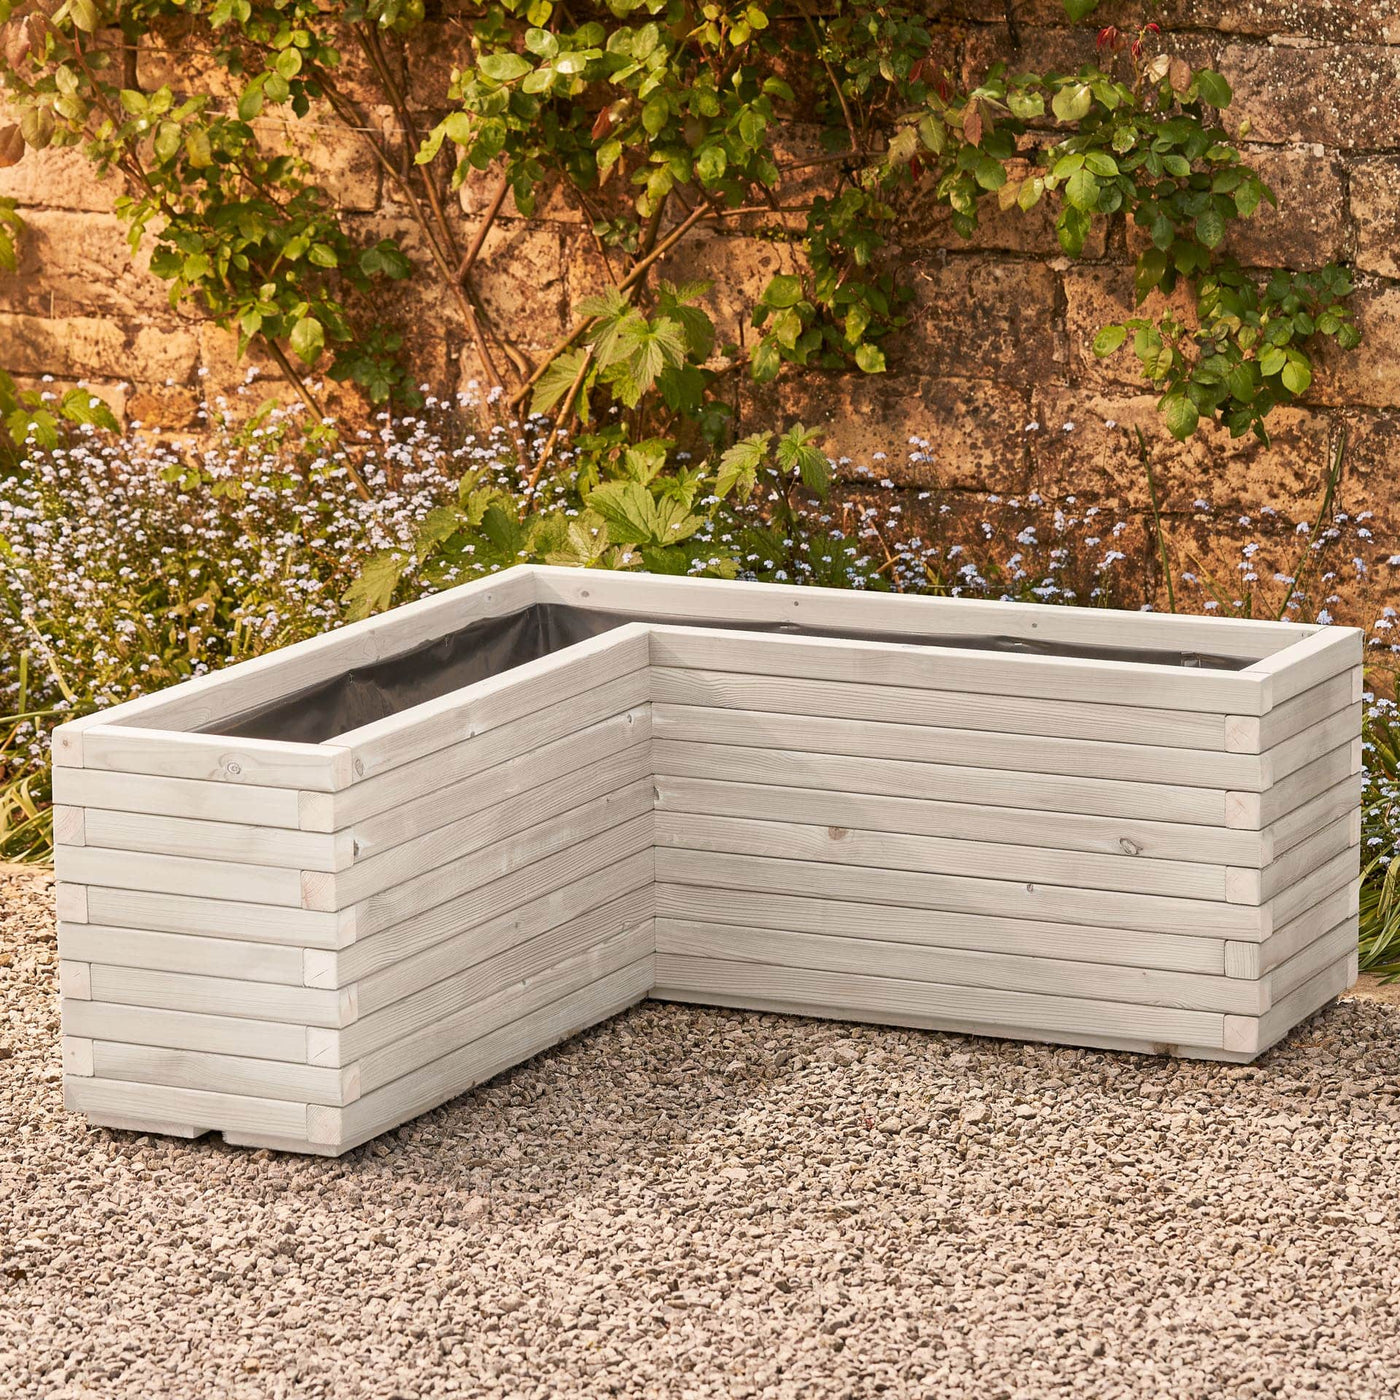 White Wooden Corner L Shaped Garden Planter by Timber Foundry